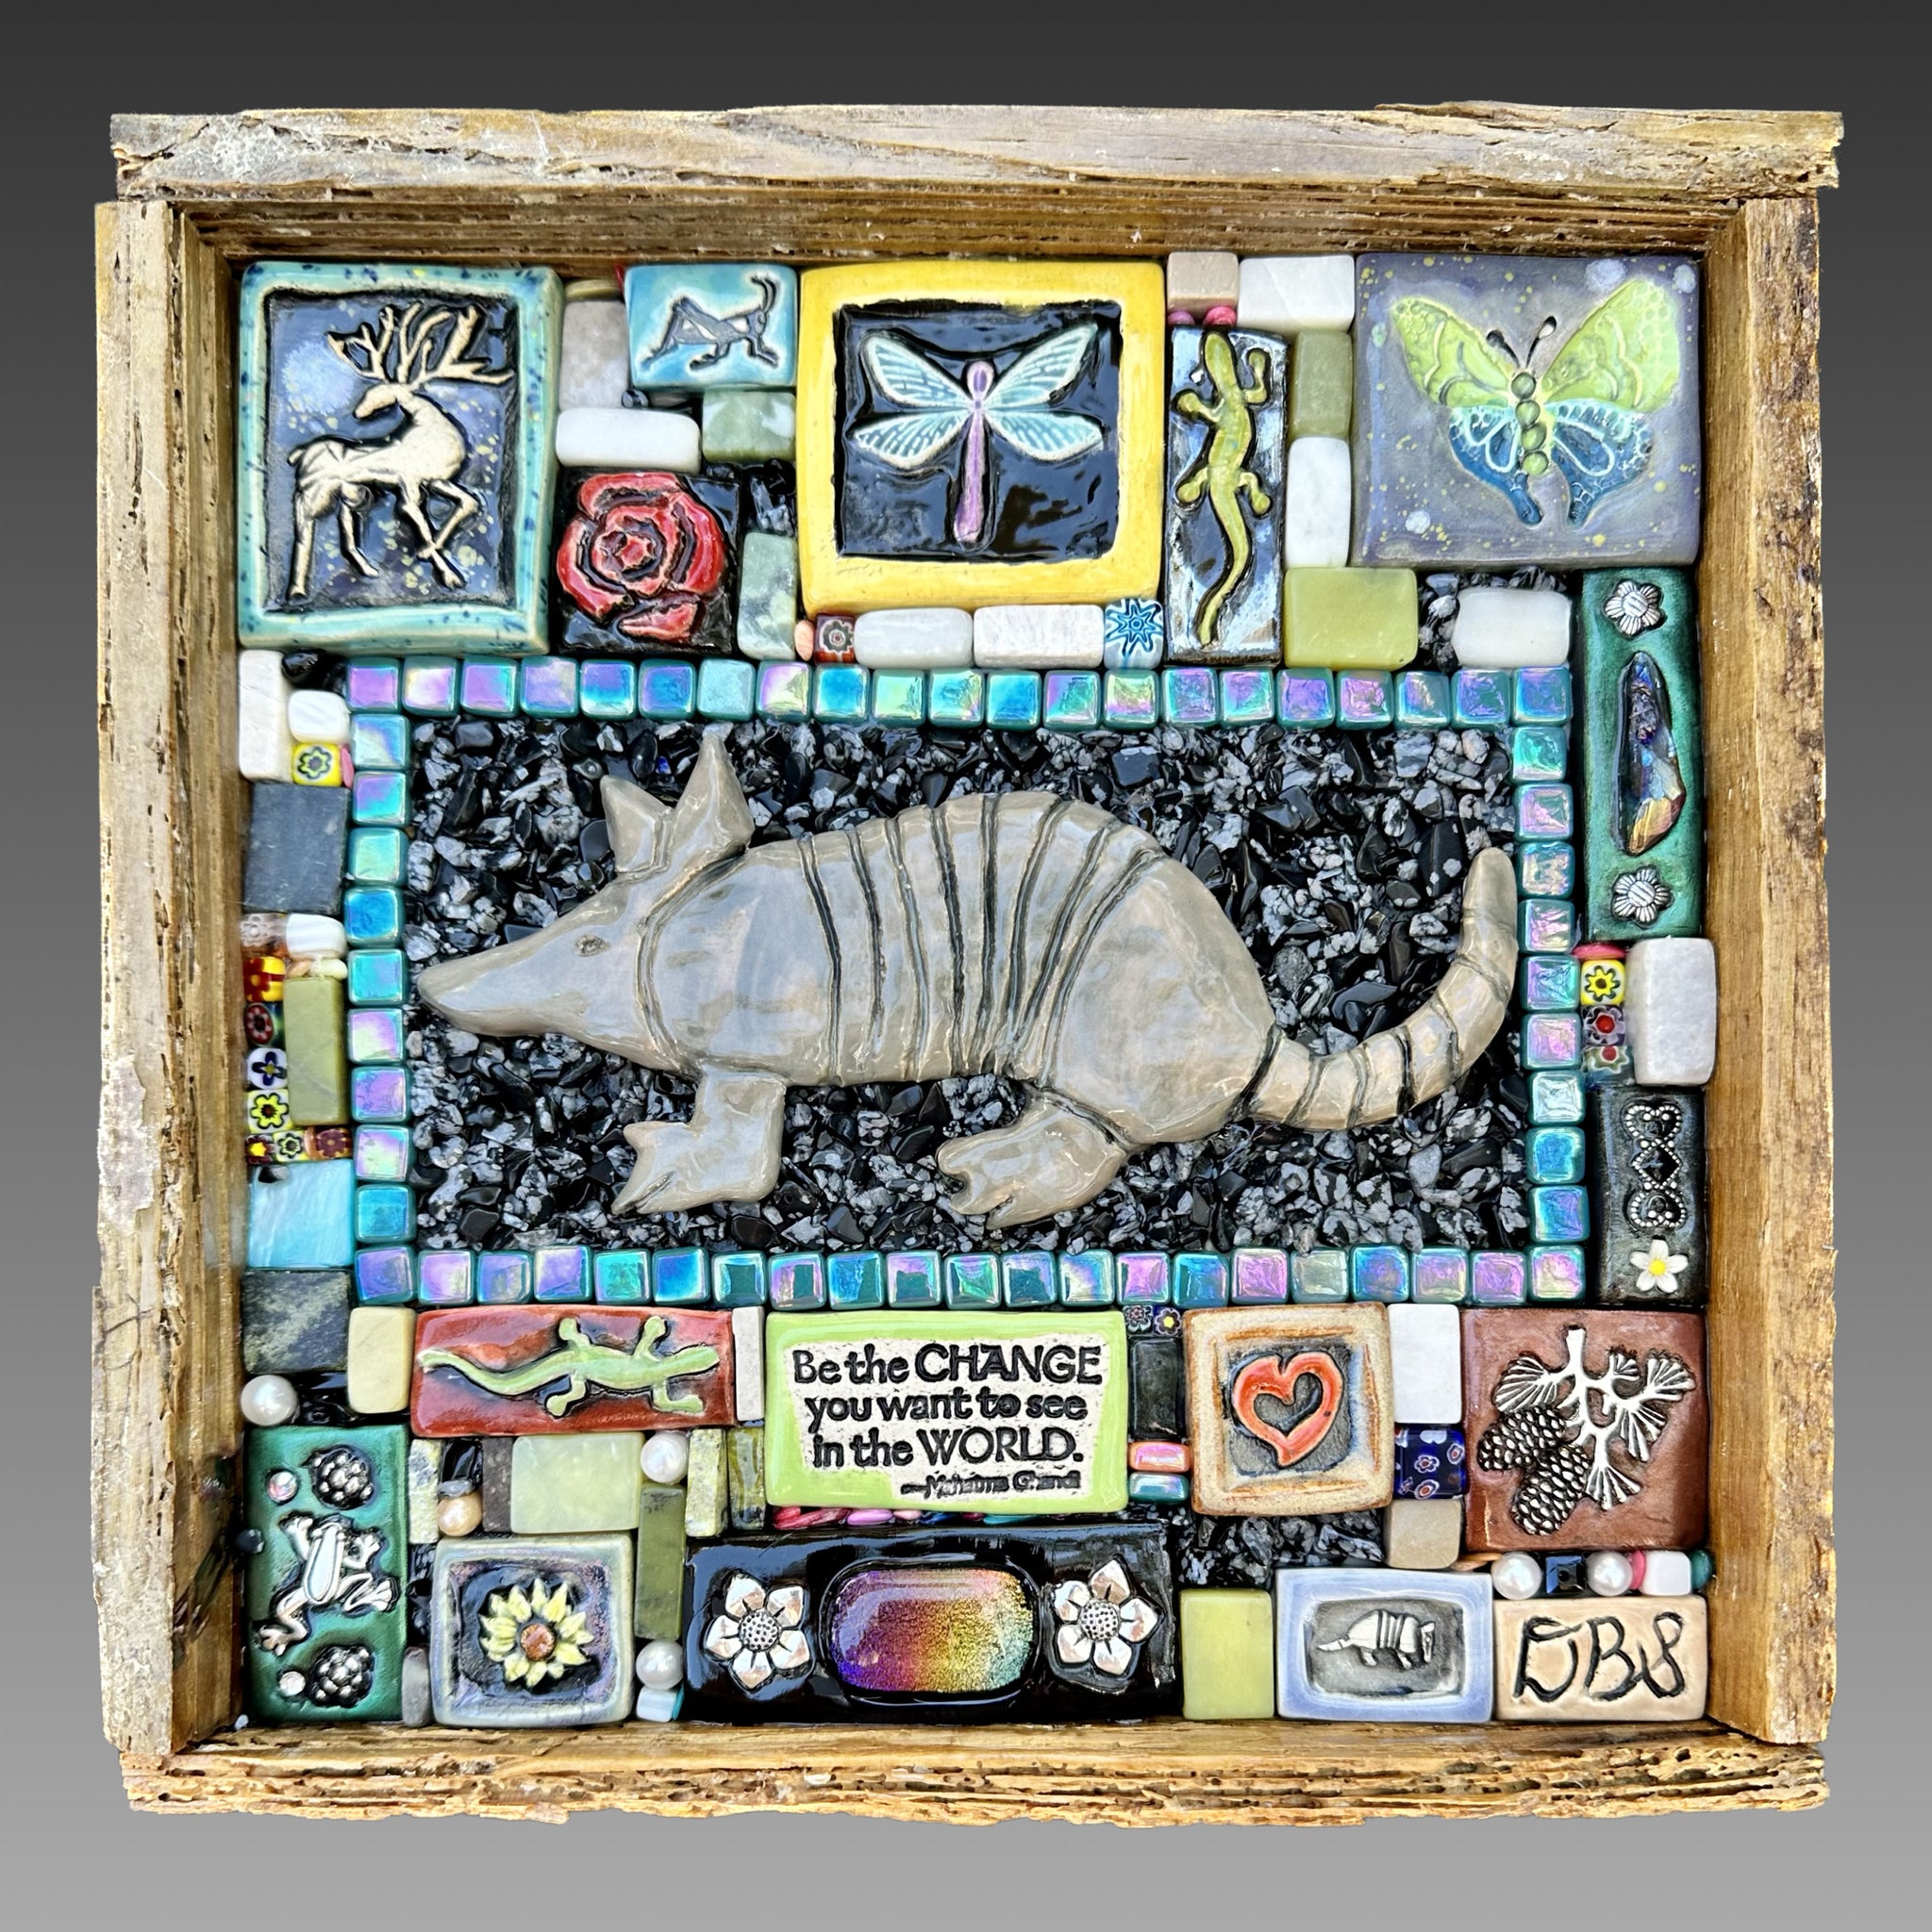 Clay mosaic artwork with nature and wildlife theme, armadillo art, dragonfly, butterfly, buck, deer, lizard, pinecone, be the change you want to see in the world, flowers, unique gift idea for nature lover, one-of-a-kind decor, handmade, flowers